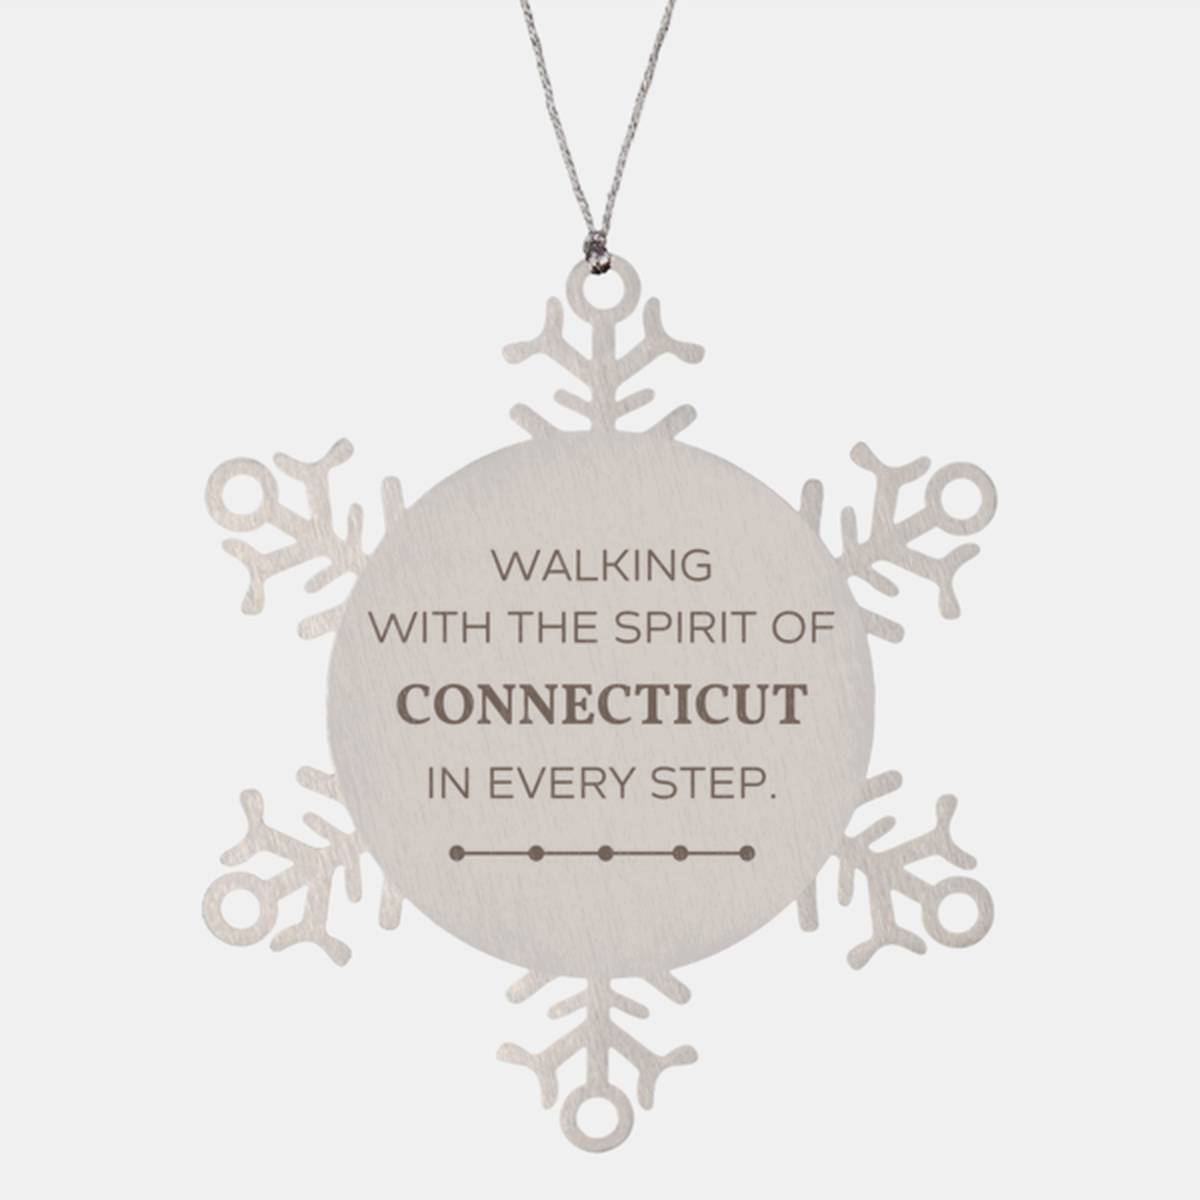 Connecticut Gifts, Walking with the spirit, Love Connecticut Birthday Christmas Snowflake Ornament For Connecticut People, Men, Women, Friends